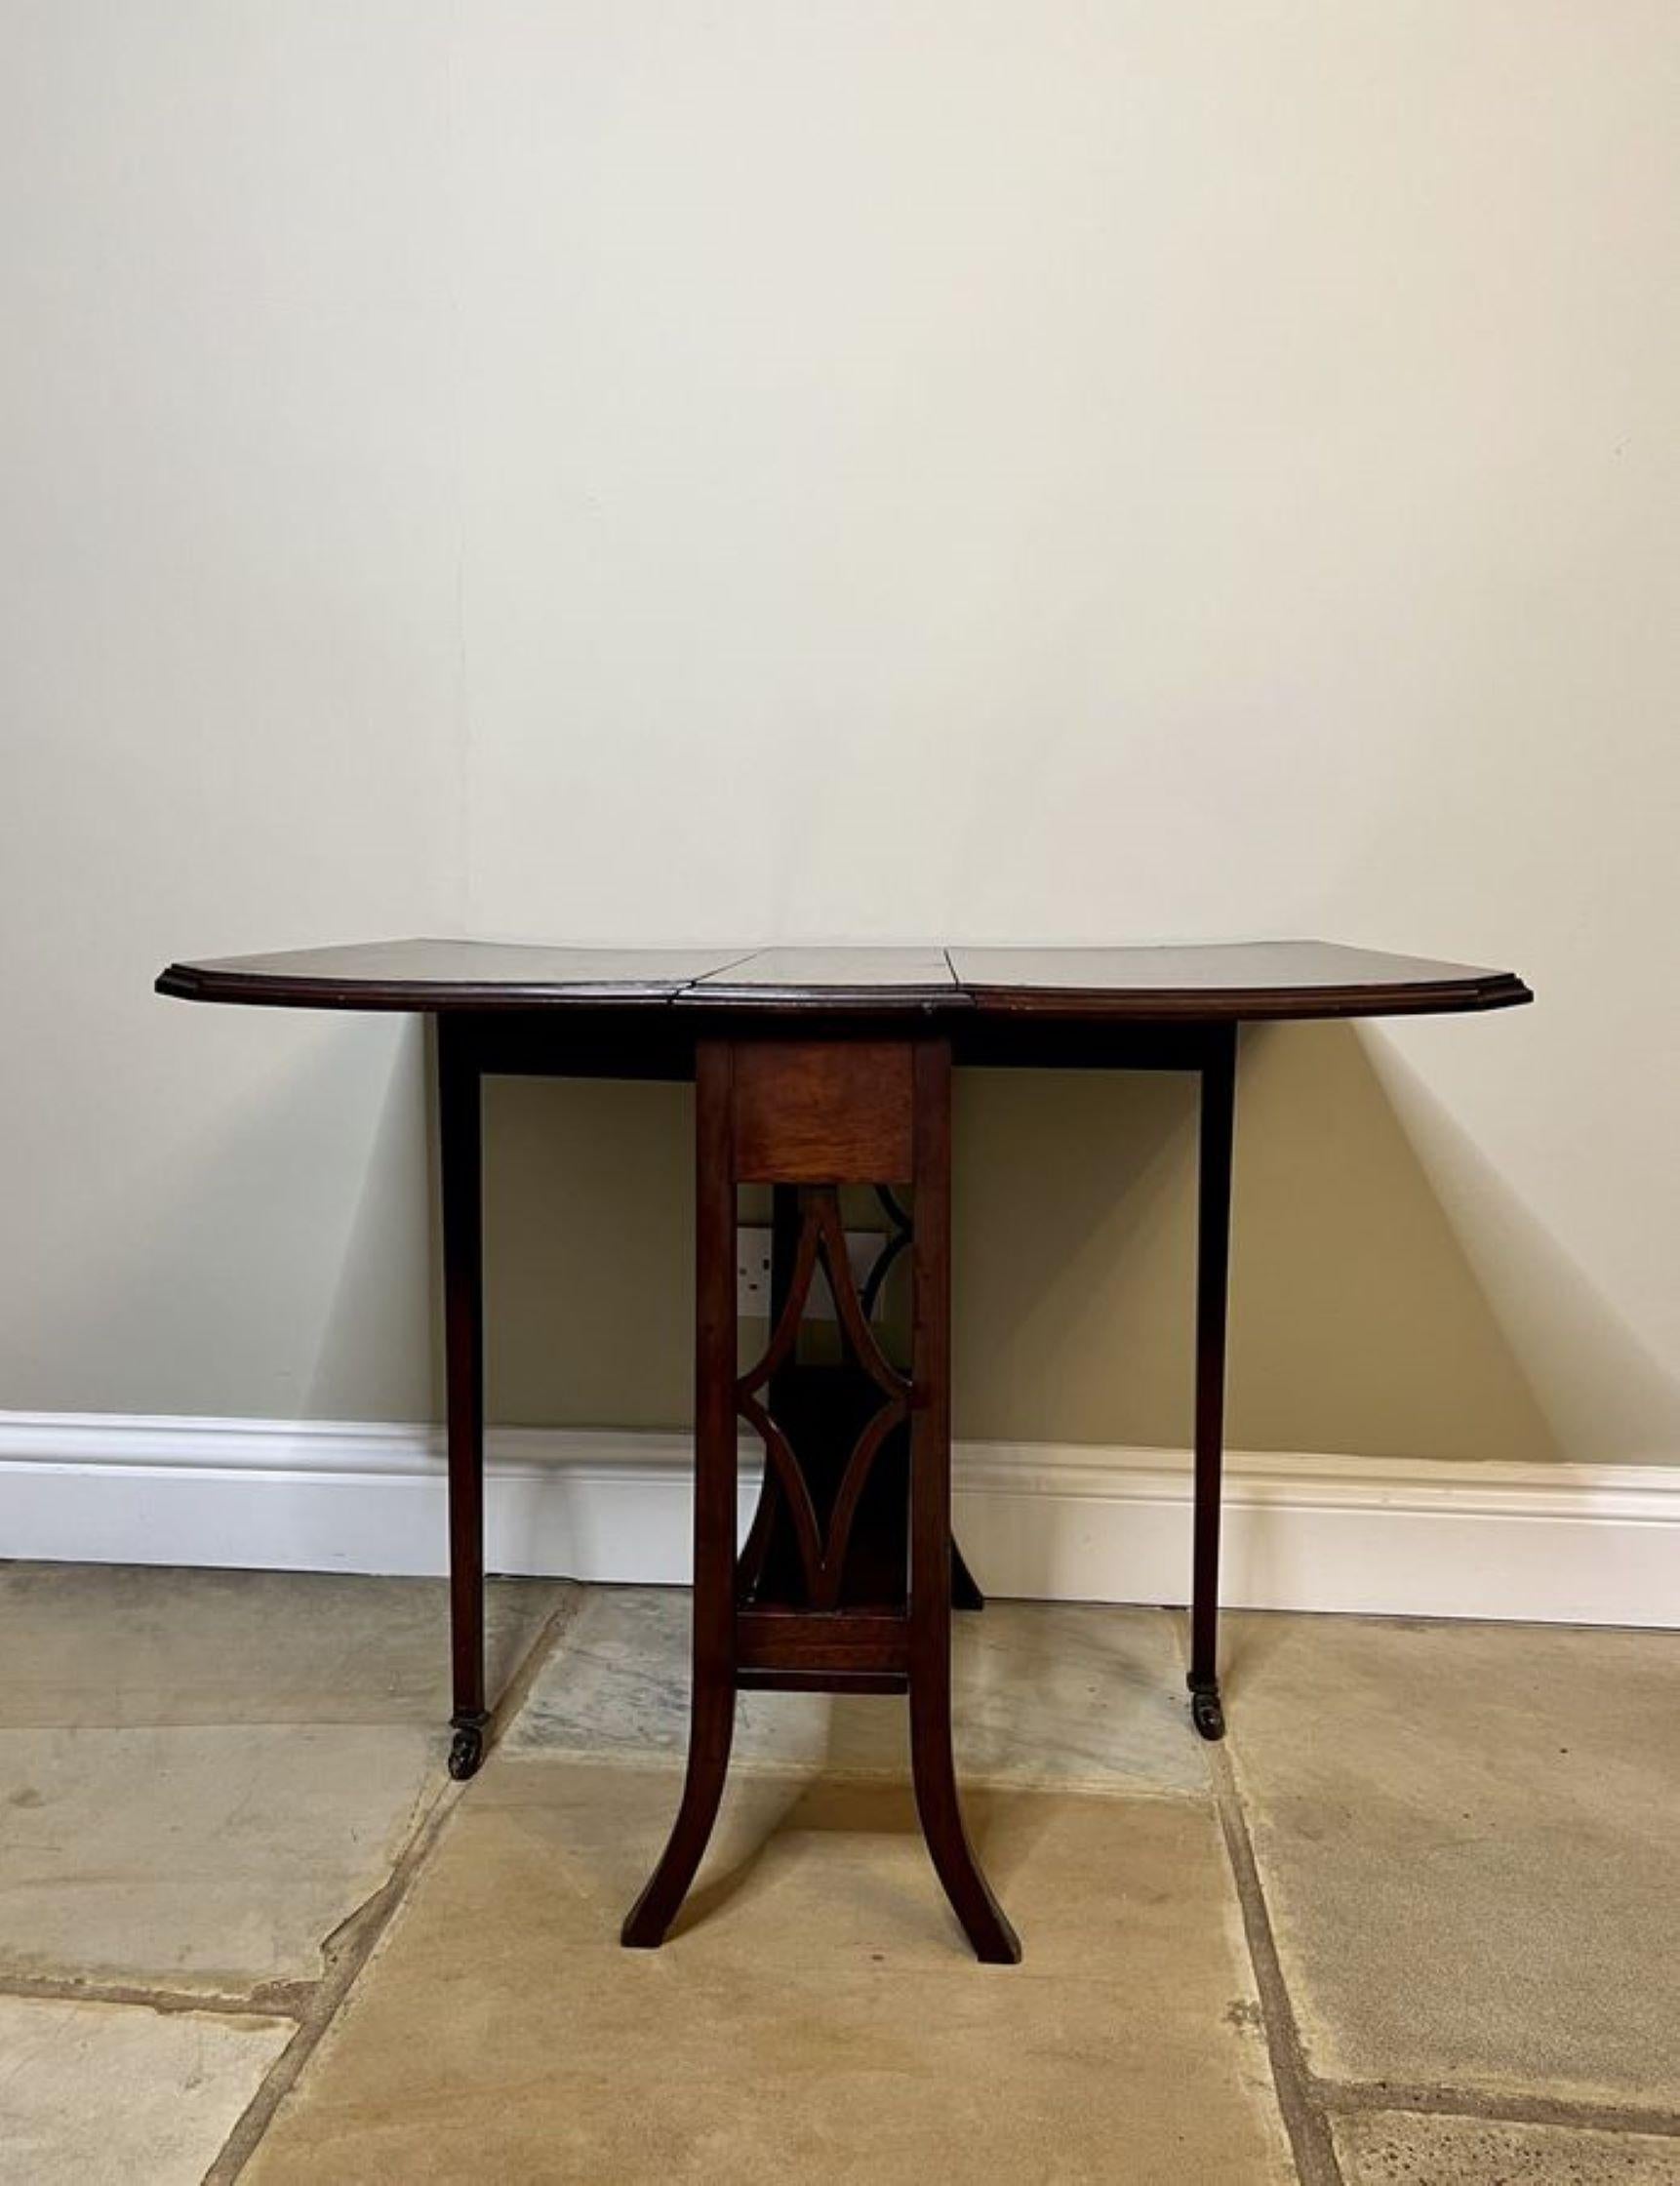 Quality antique Edwardian inlaid mahogany Sutherland table having a quality mahogany top with two drop leaves crossbanded in satinwood, swing out gatelegs supported by shaped mahogany legs with the original castors united by a mahogany undertier.